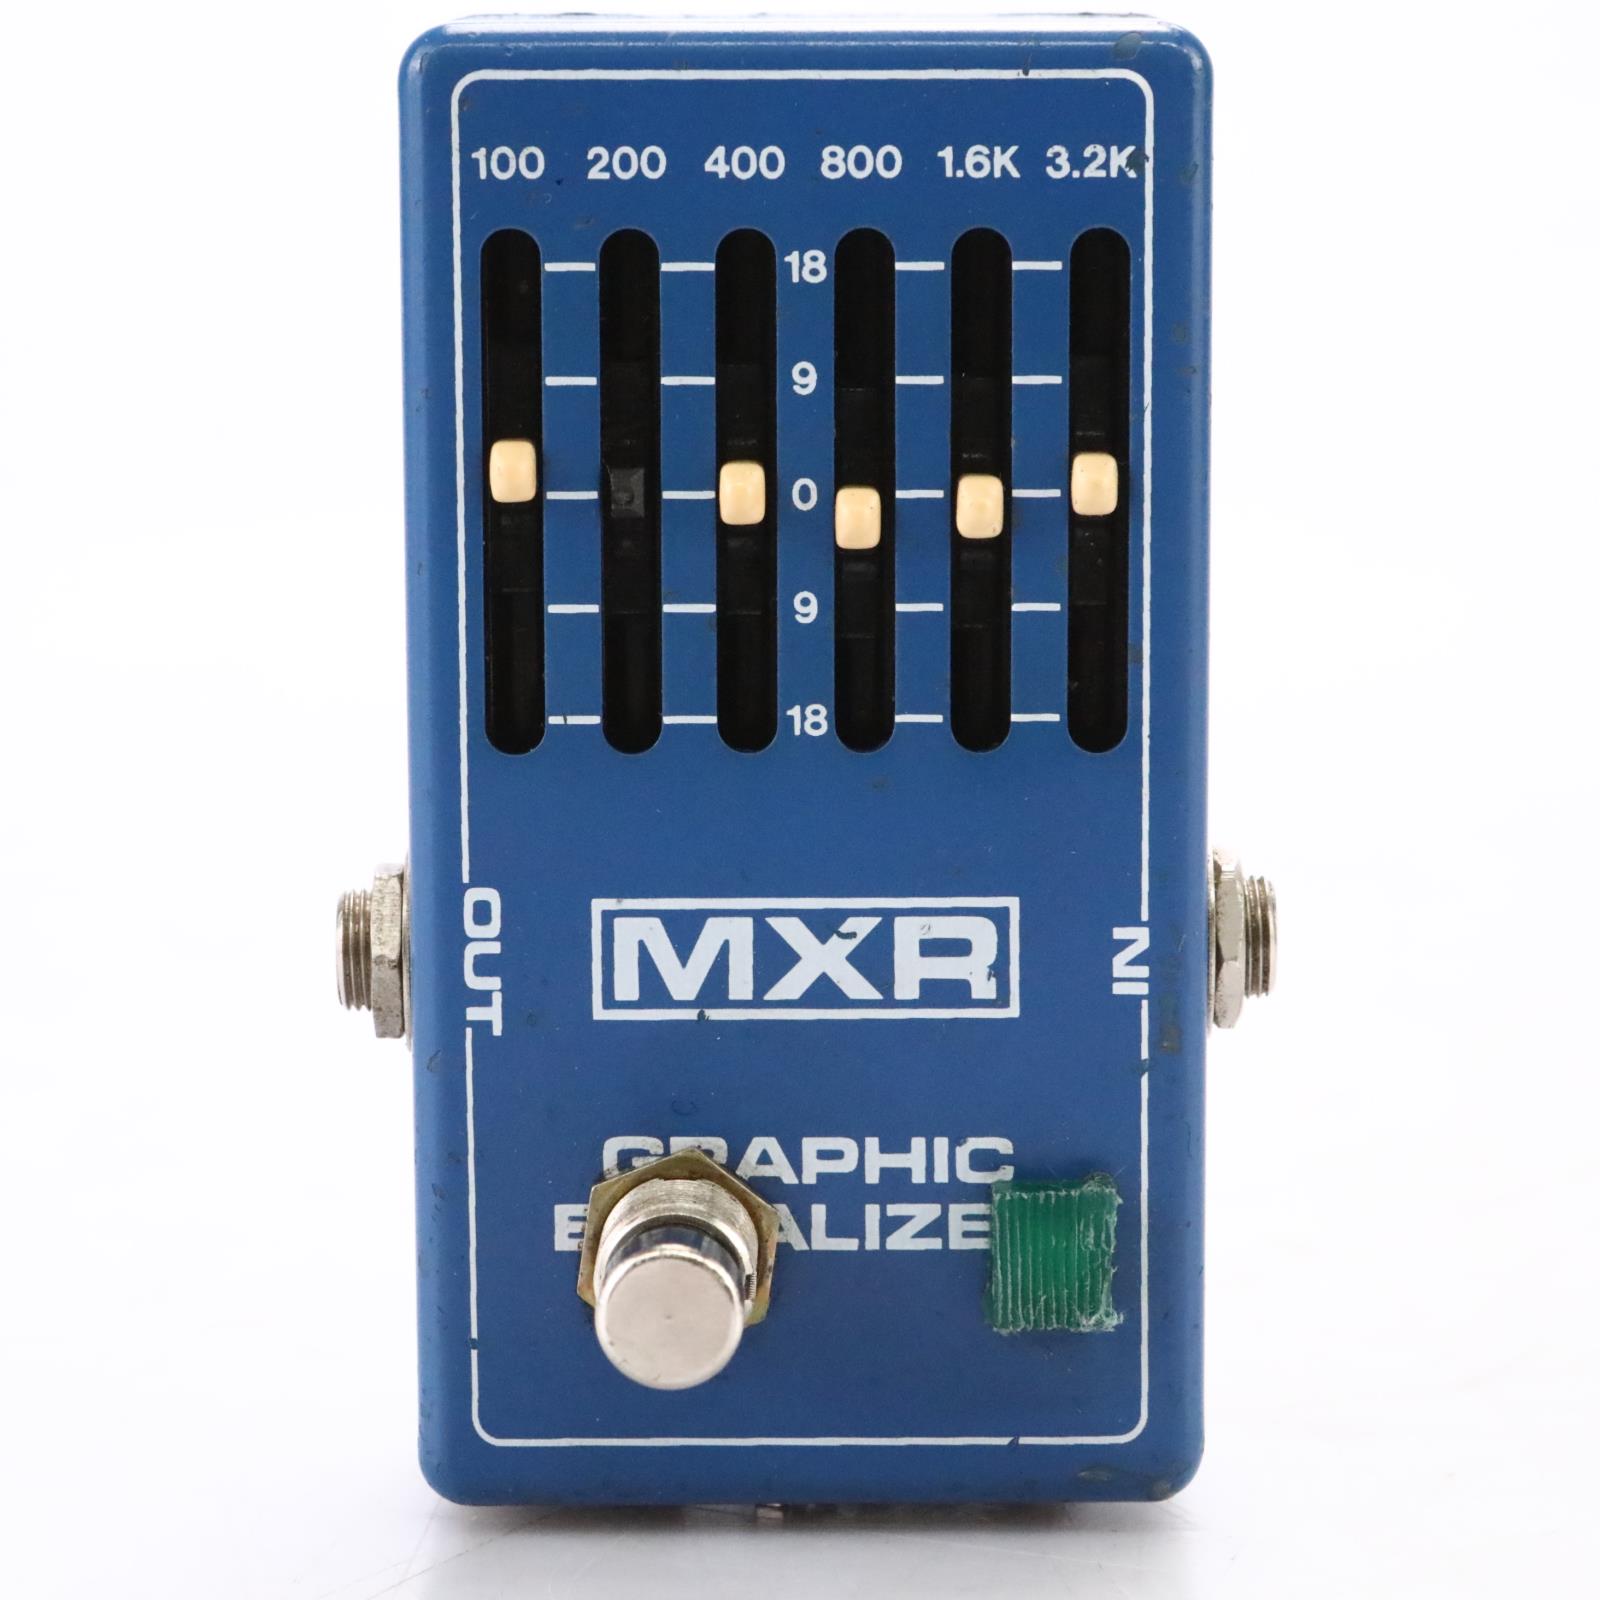 MXR MX-109 Graphic Equalizer Effects Pedal Rivera Owned by Mitch Holder #48658